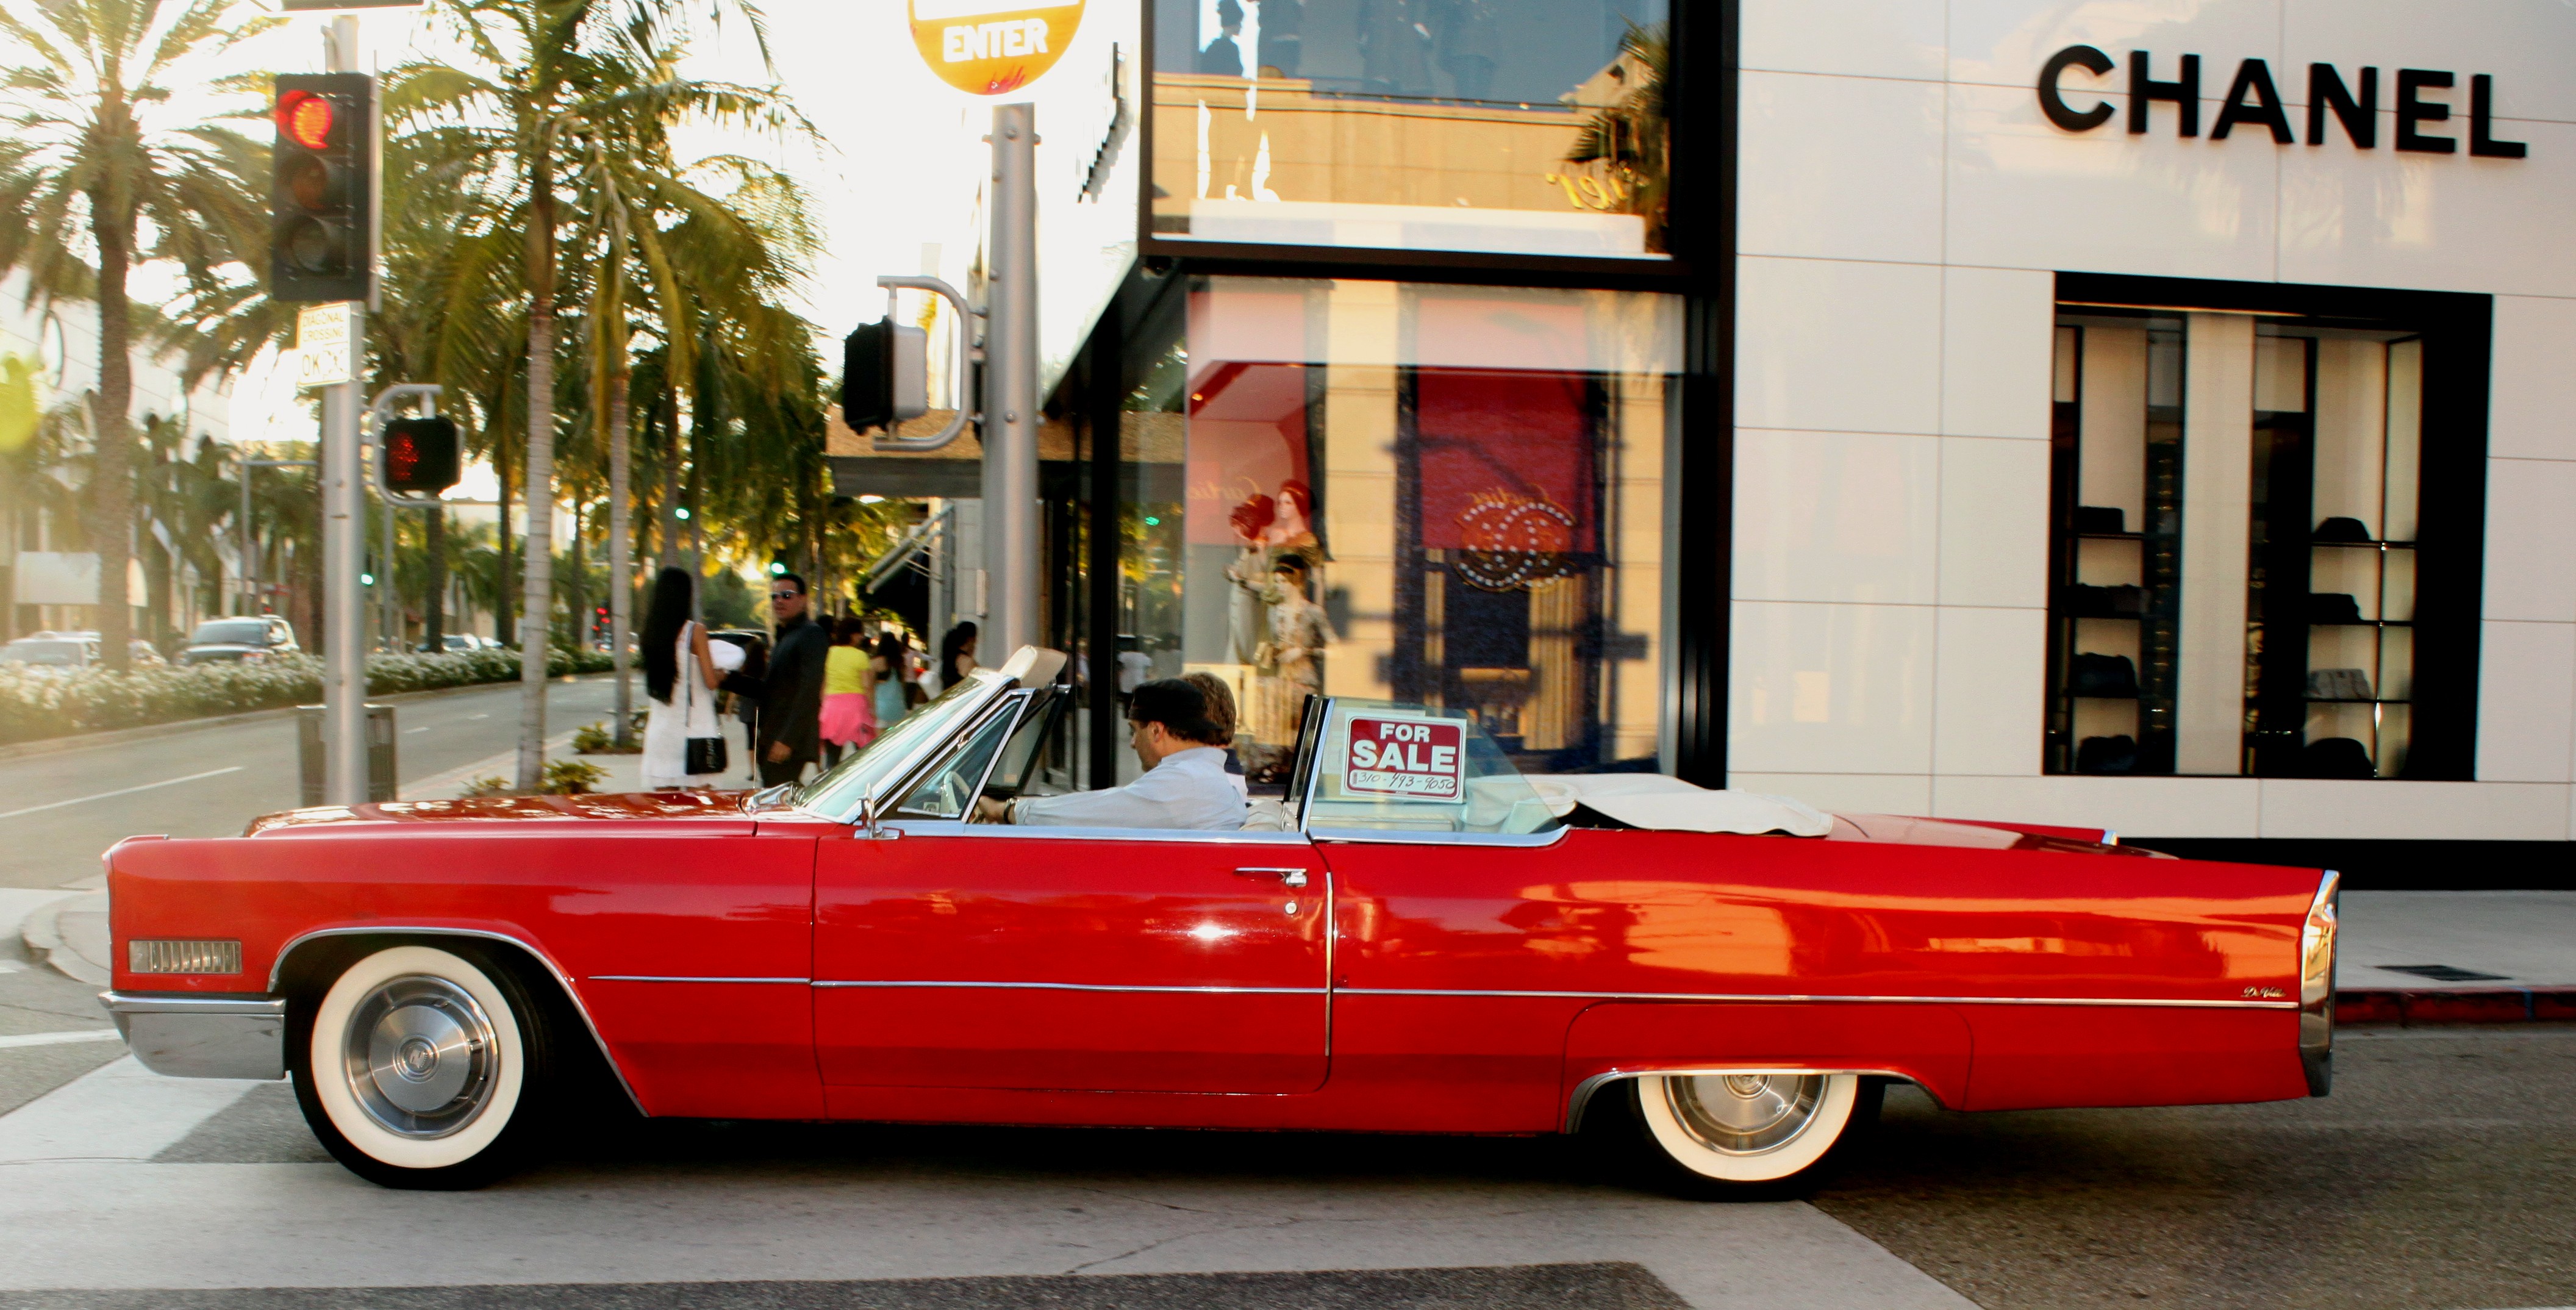 File:( 1966 ) RED CADILLAC deVille ~ for sale.jpg - Wikimedia Commons